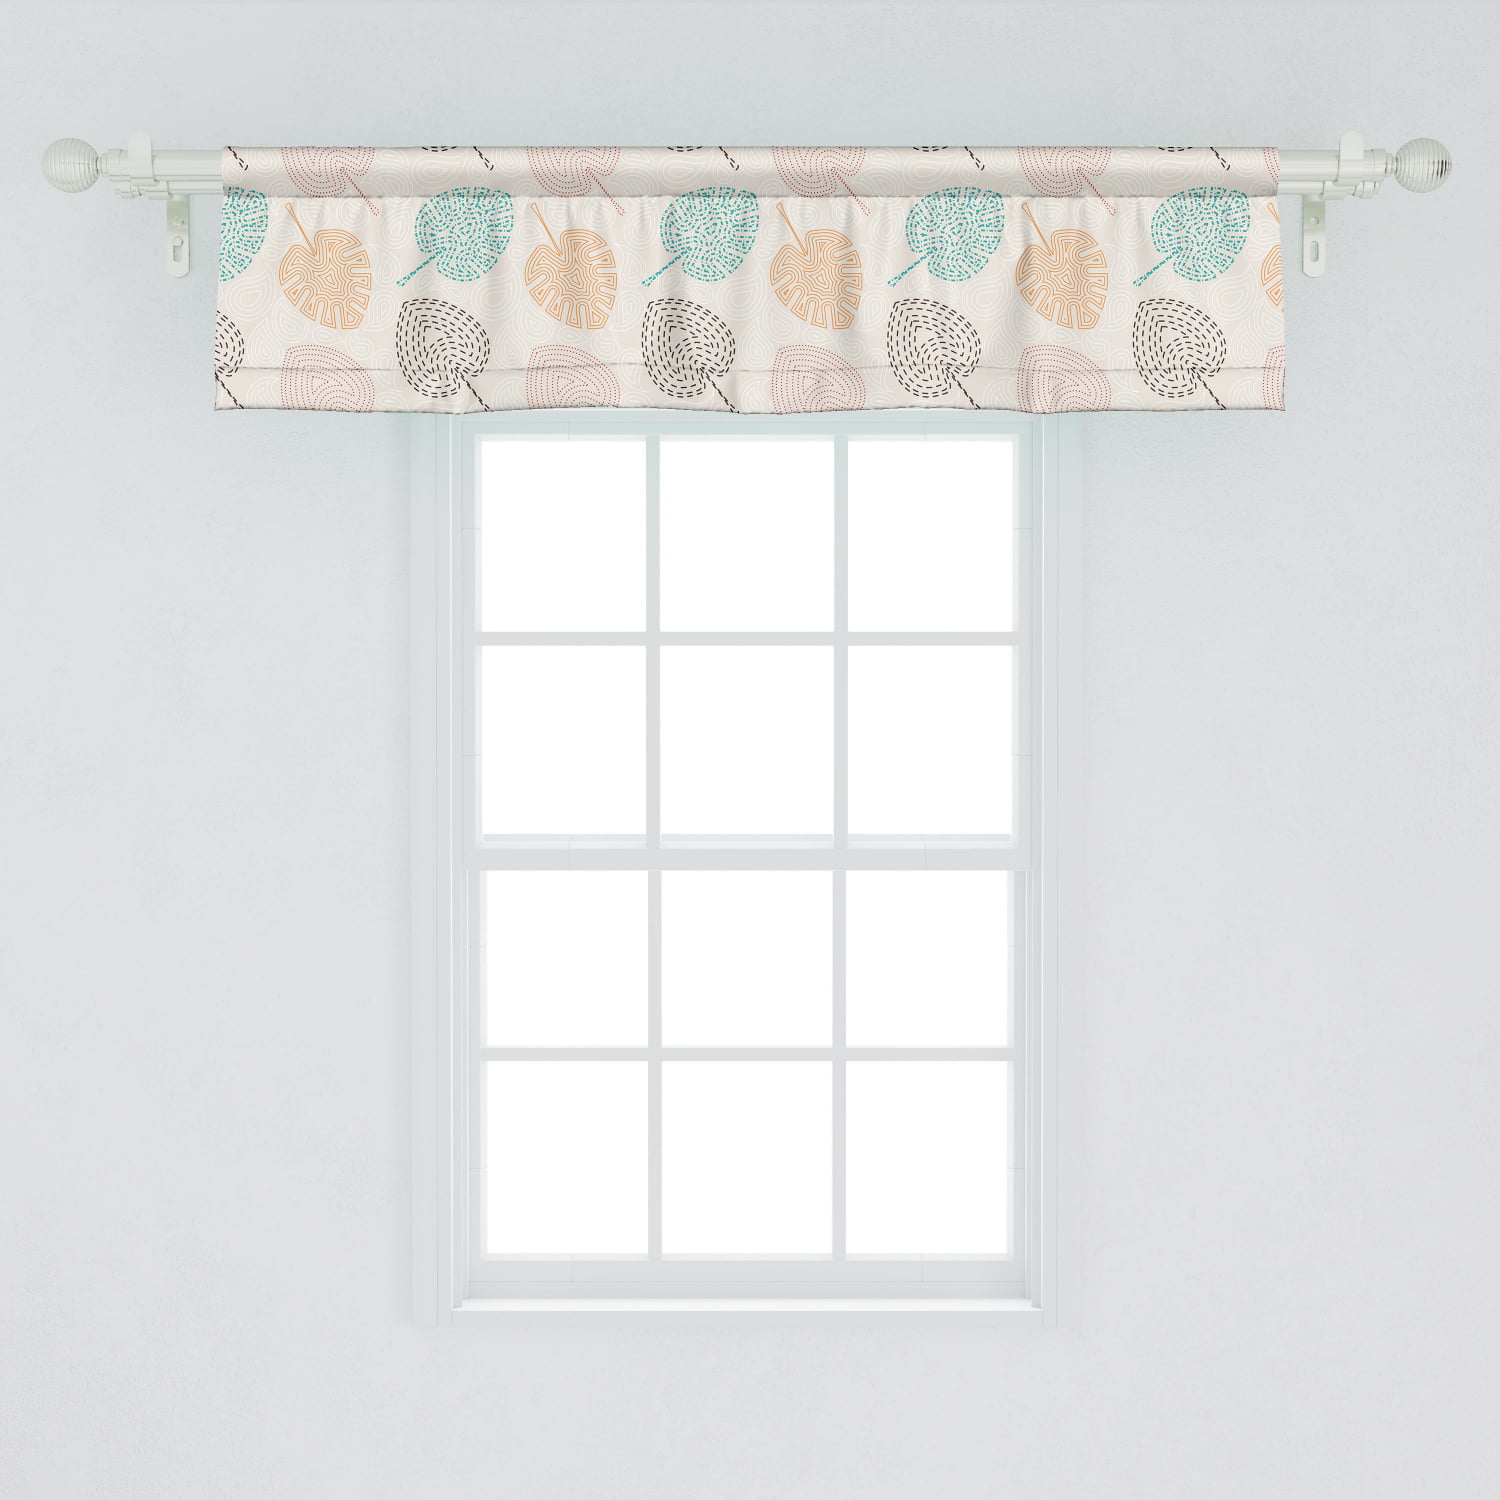 Ambesonne Leaves Window Valance, Exotic Nature Pattern with Abstract  Memphis Style Leaf Designs, Curtain Valance for Kitchen Bedroom Decor with  Rod ...